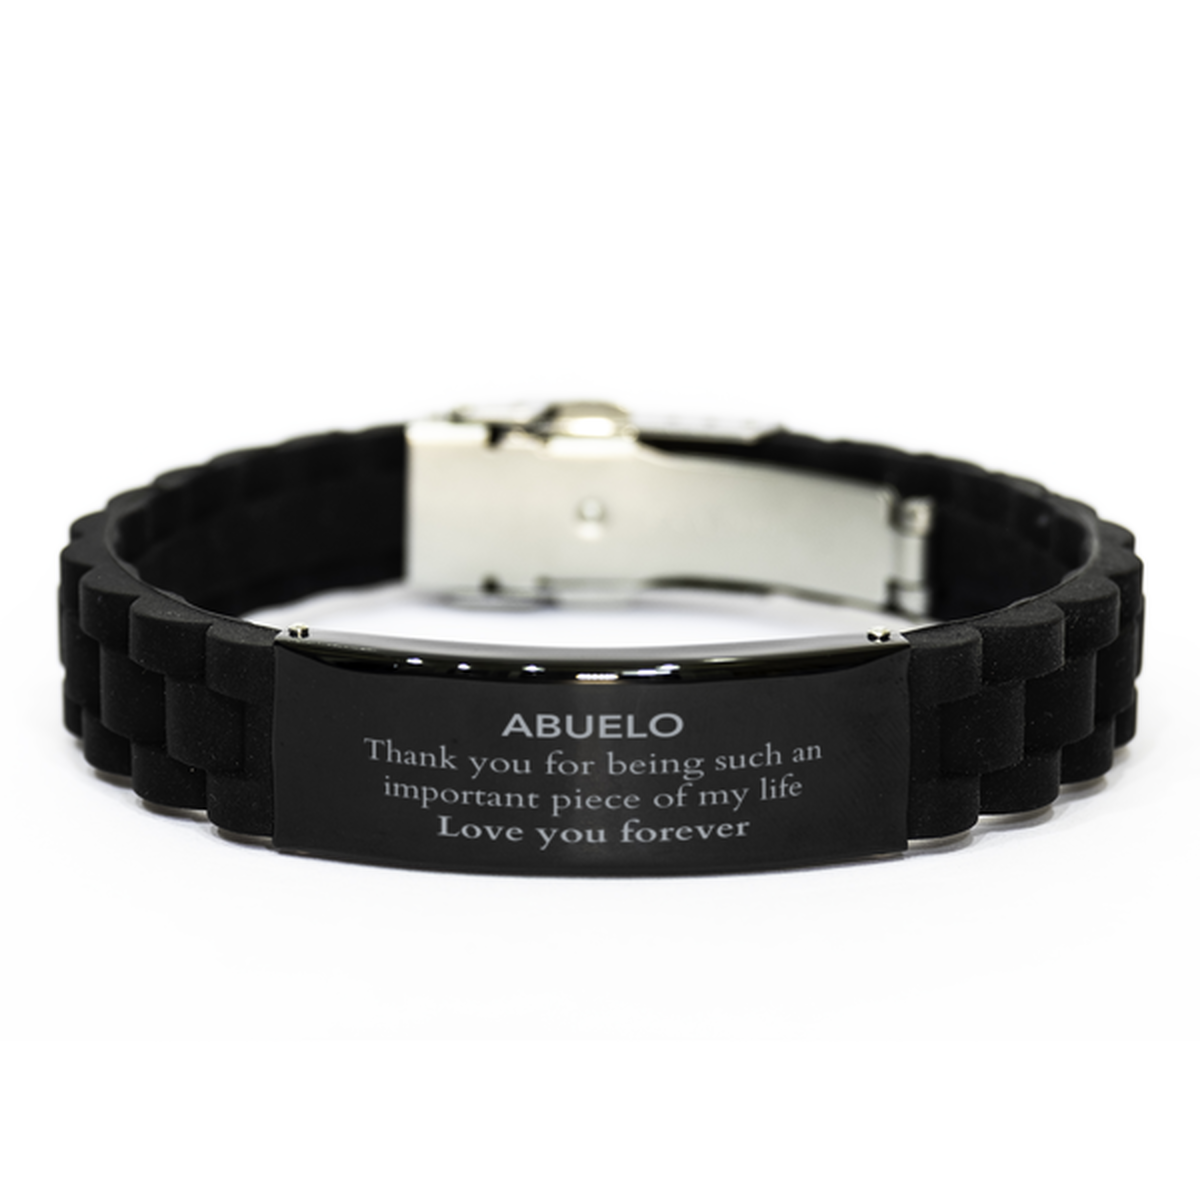 Appropriate Abuelo Black Glidelock Clasp Bracelet Epic Birthday Gifts for Abuelo Thank you for being such an important piece of my life Abuelo Christmas Mothers Fathers Day